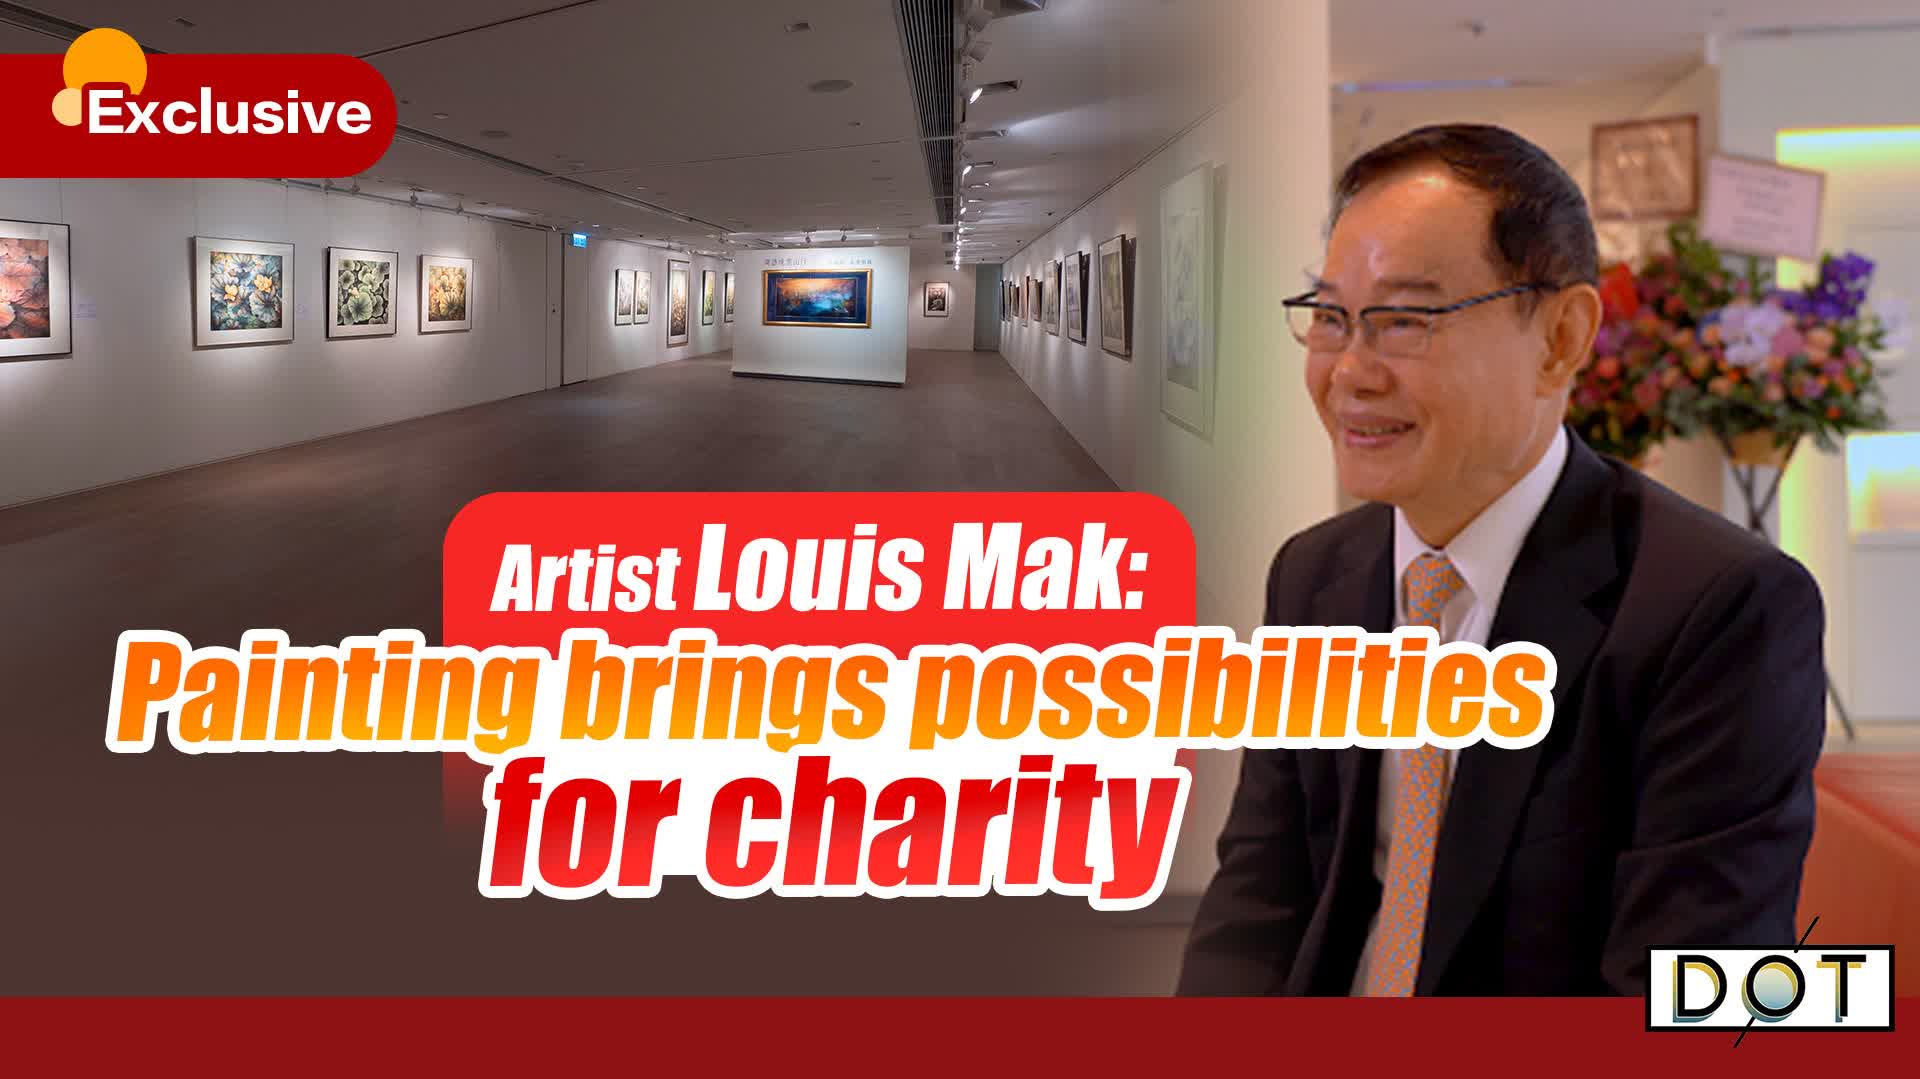 Exclusive | Artist Louis Mak: Painting brings possibilities for charity